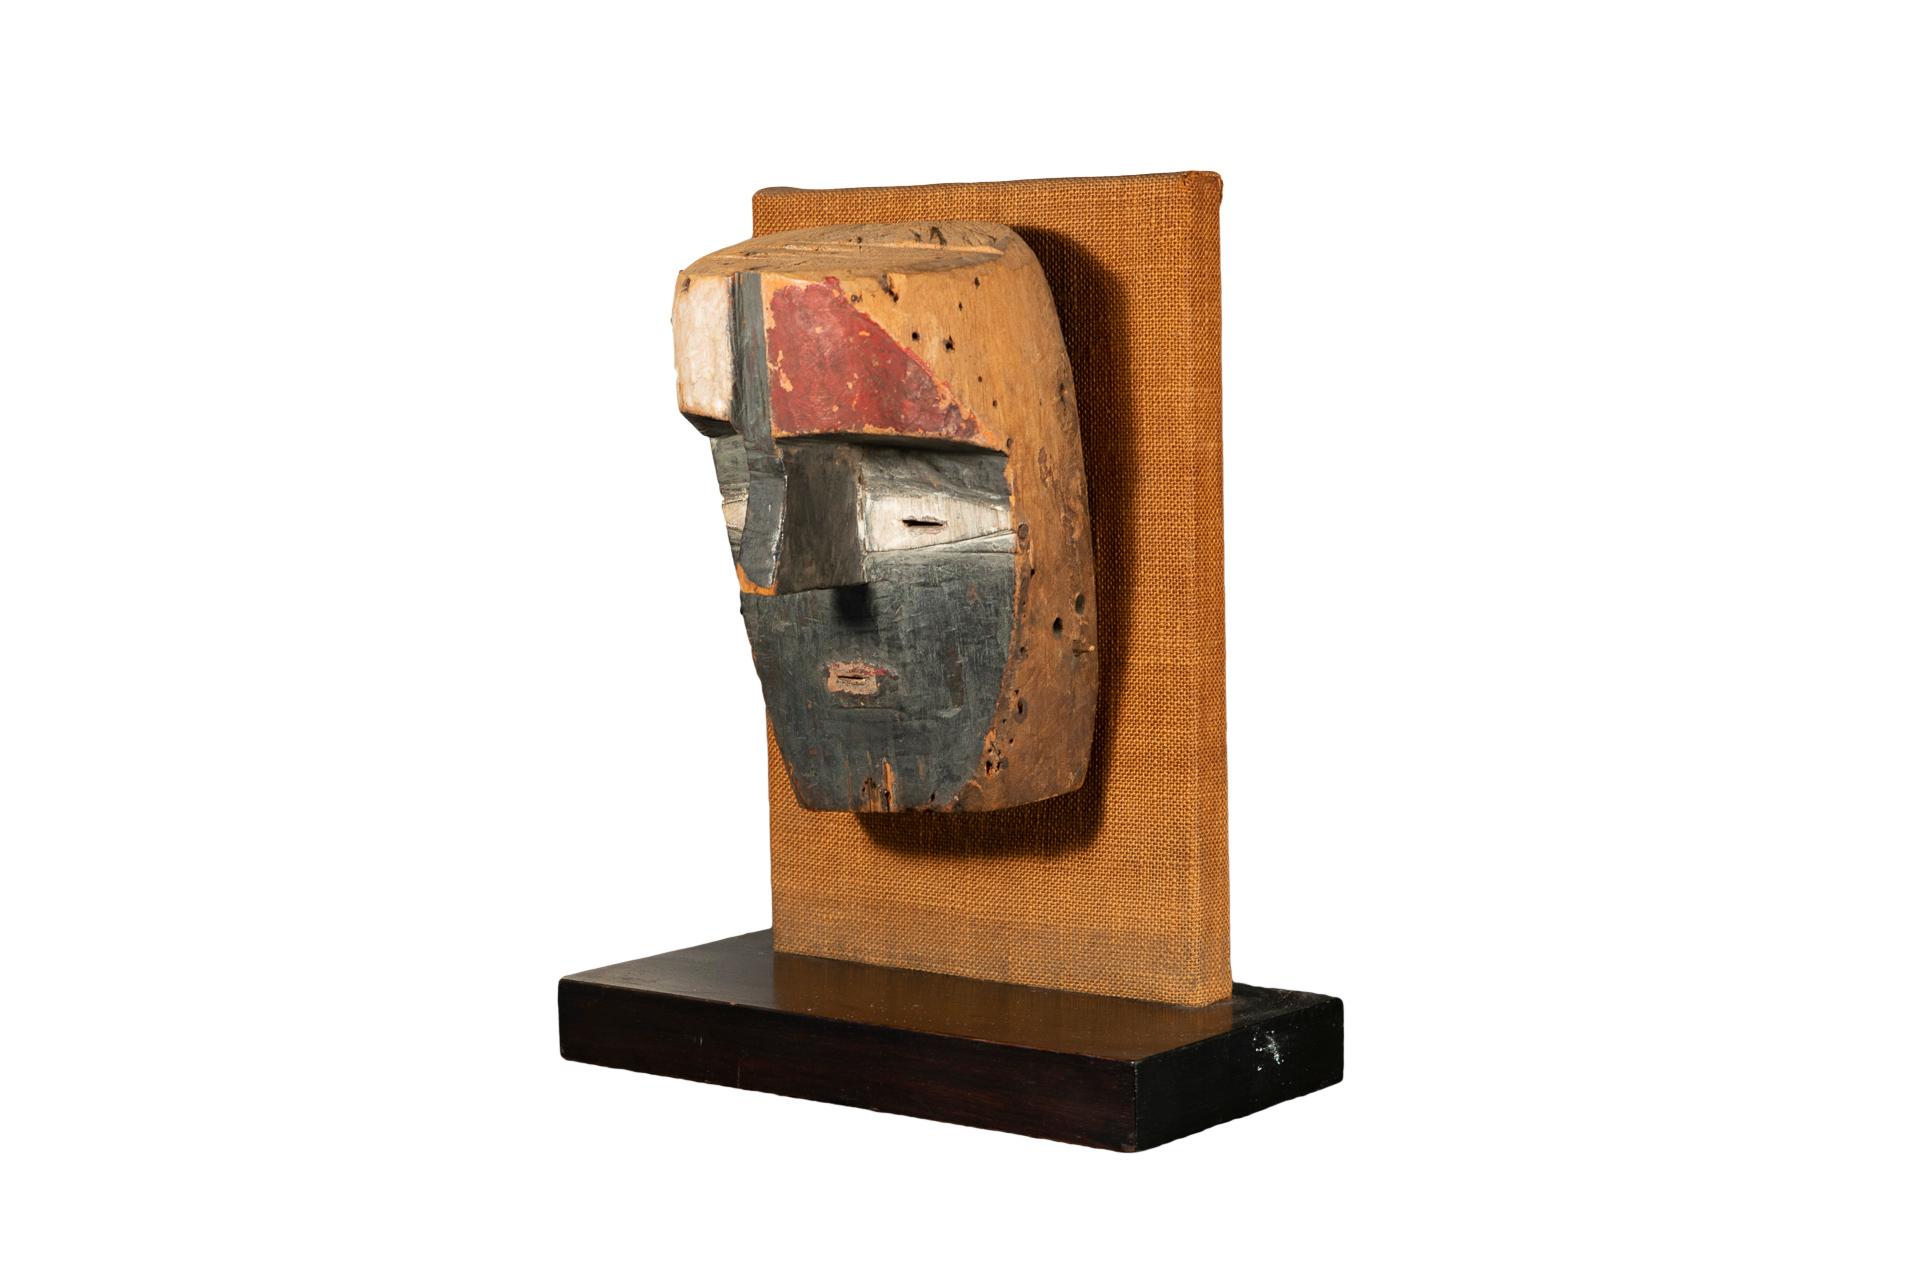 Aduma mask, 
White, red and black wood and pigments
Usual patina, 
Early 19th century, Gabon.

Old label at the back: 
